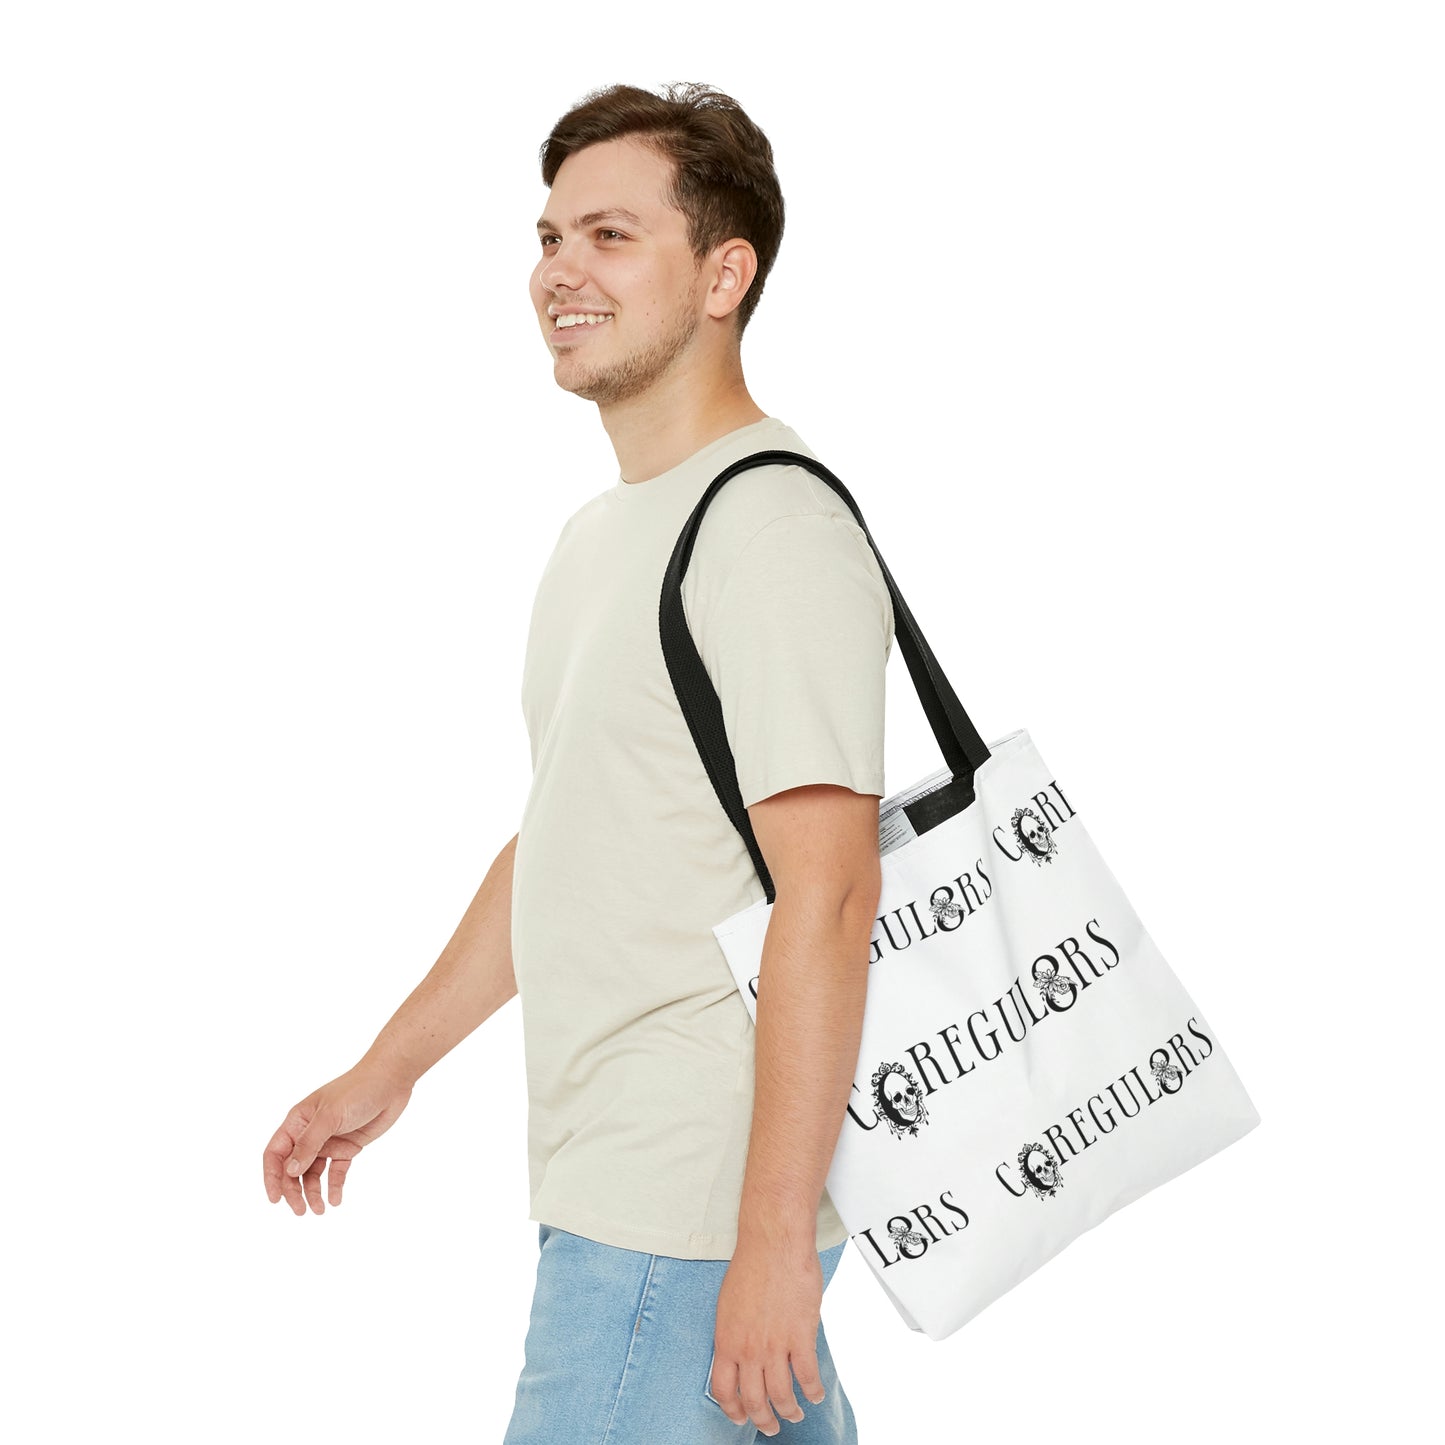 Official Co-Regulators Merch [Gauthism Line] Tote Bag in 3 sizes